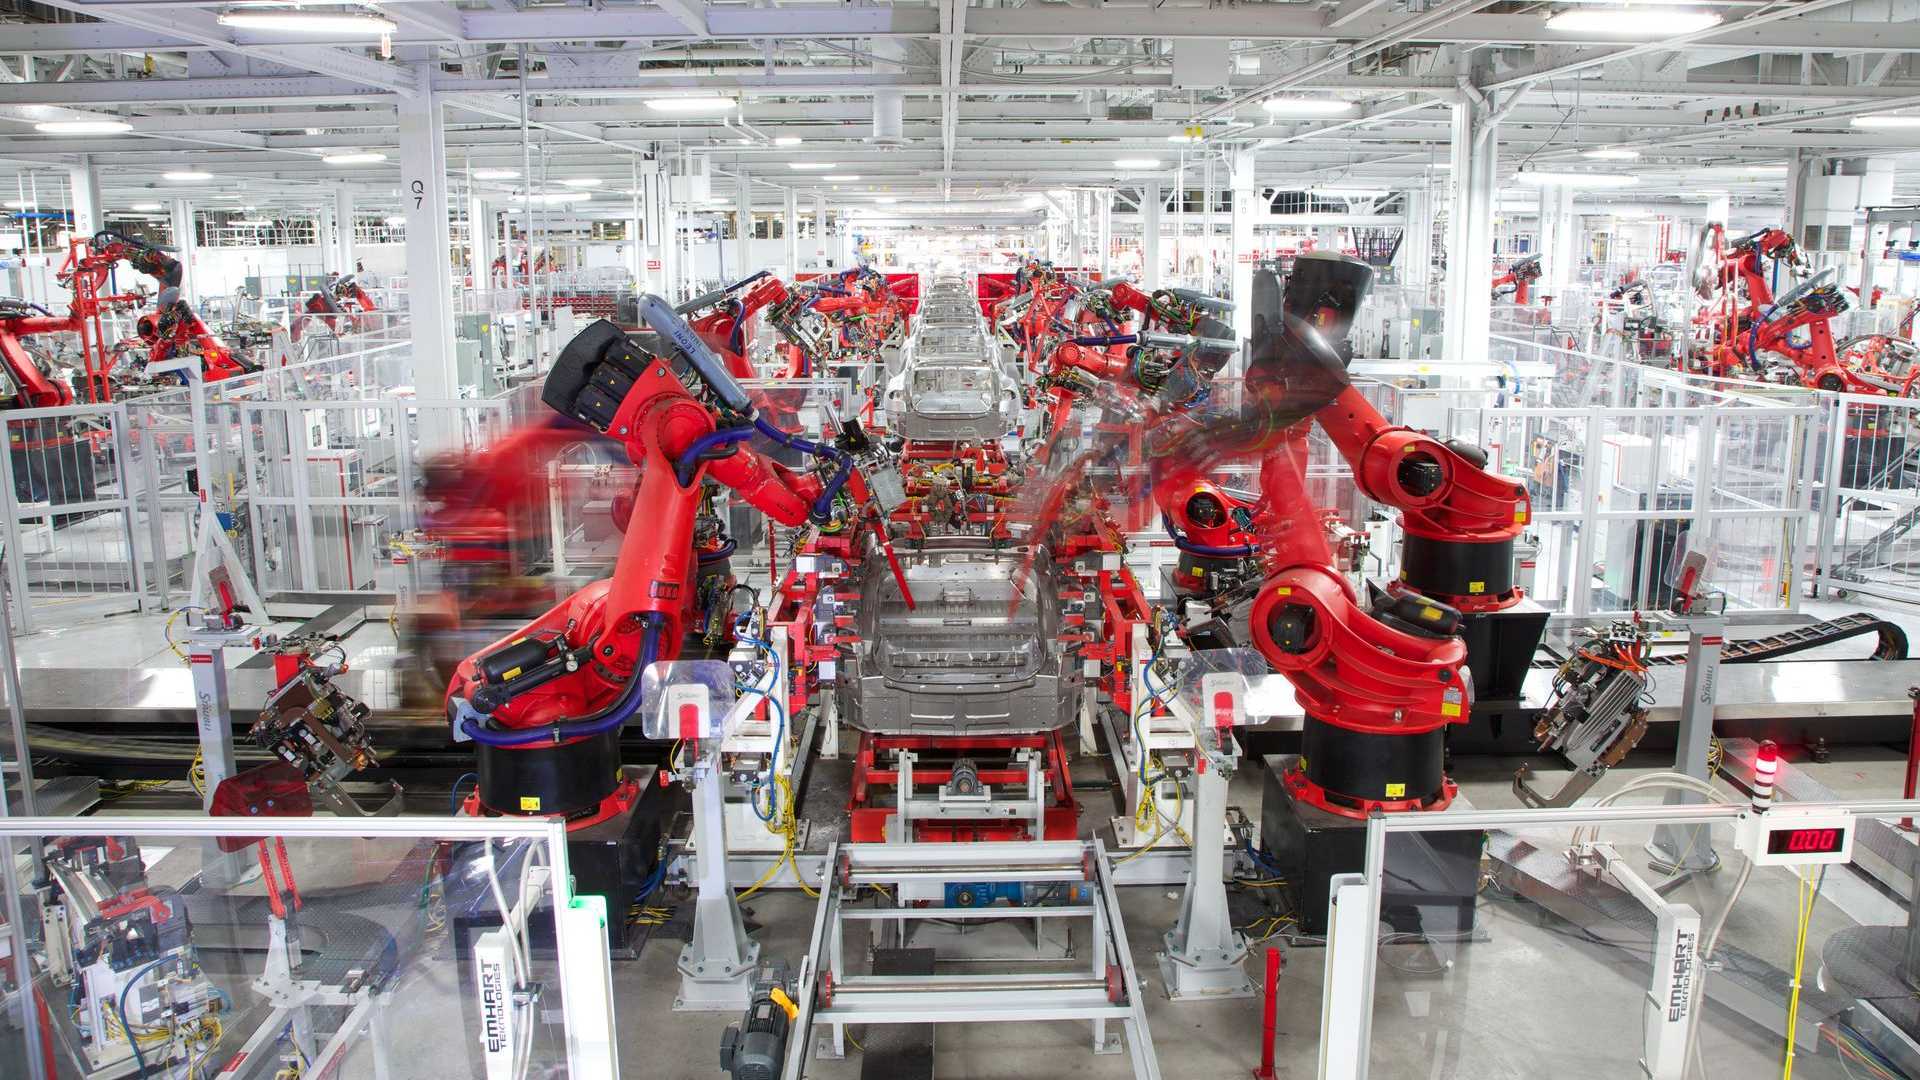 tesla wages to go up in the wake of uaw strike, barclays predicts